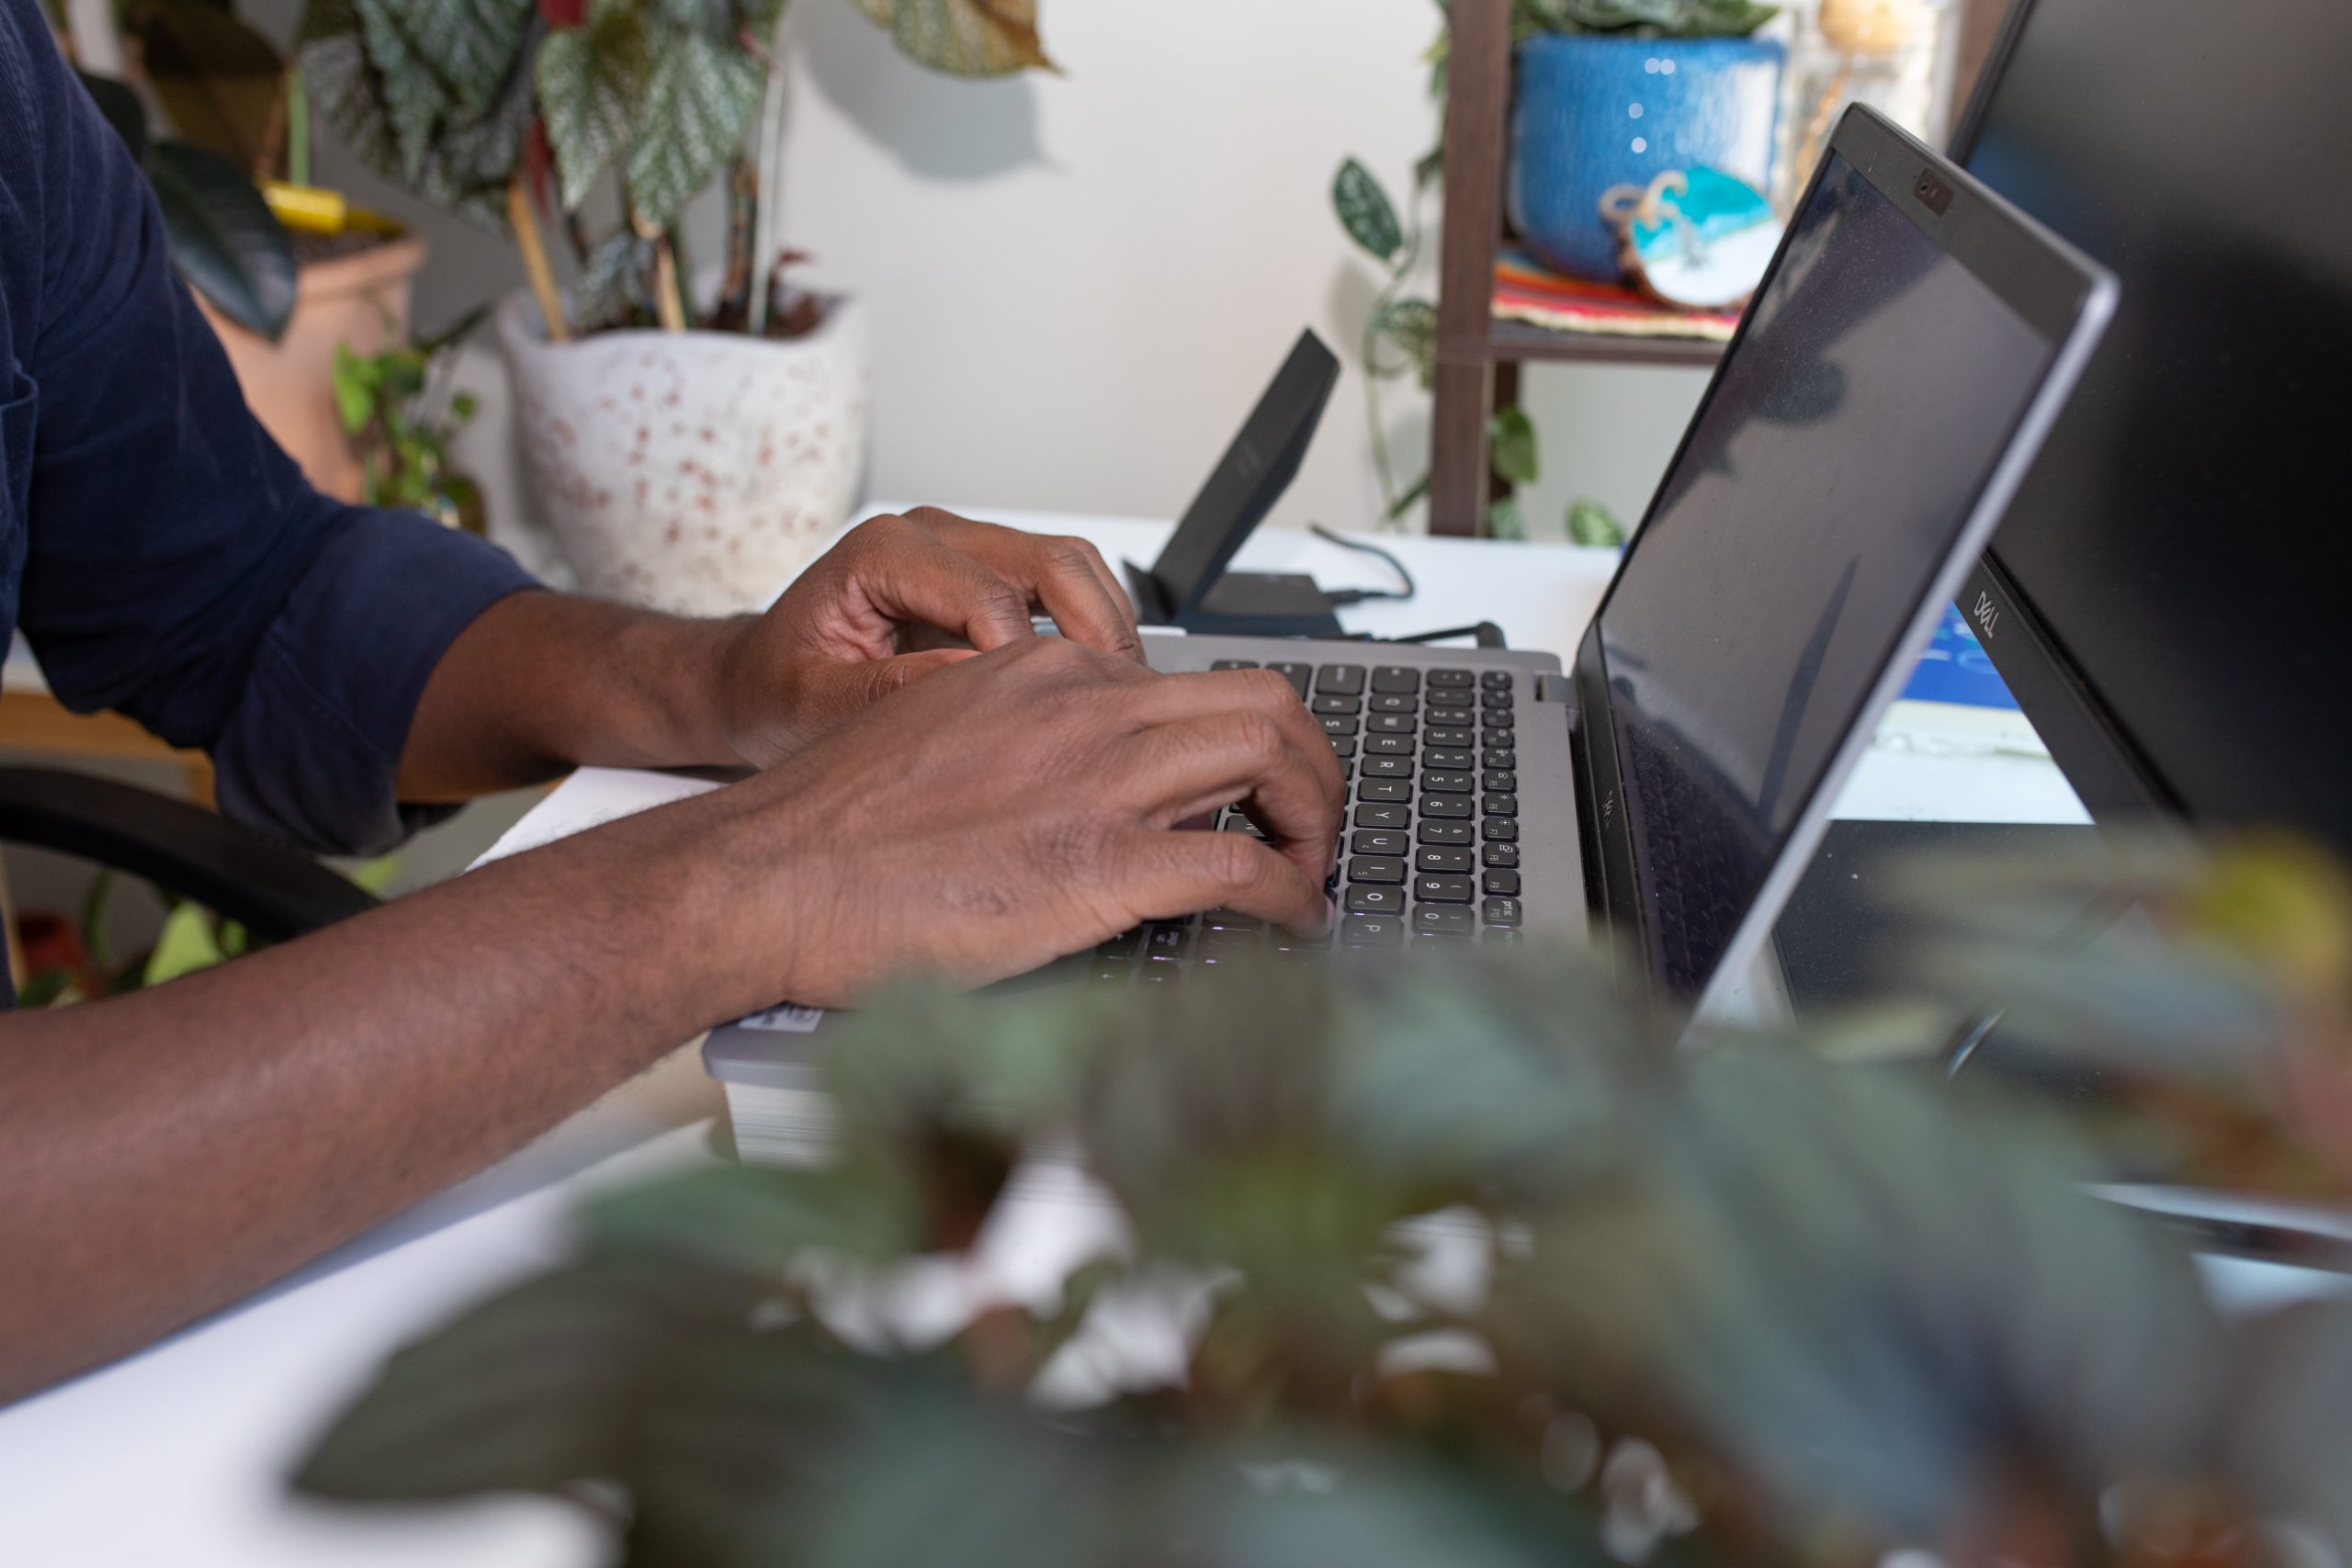 A black man, sits at a desk typing at a computer, only his arms are visible, in a room with plants.